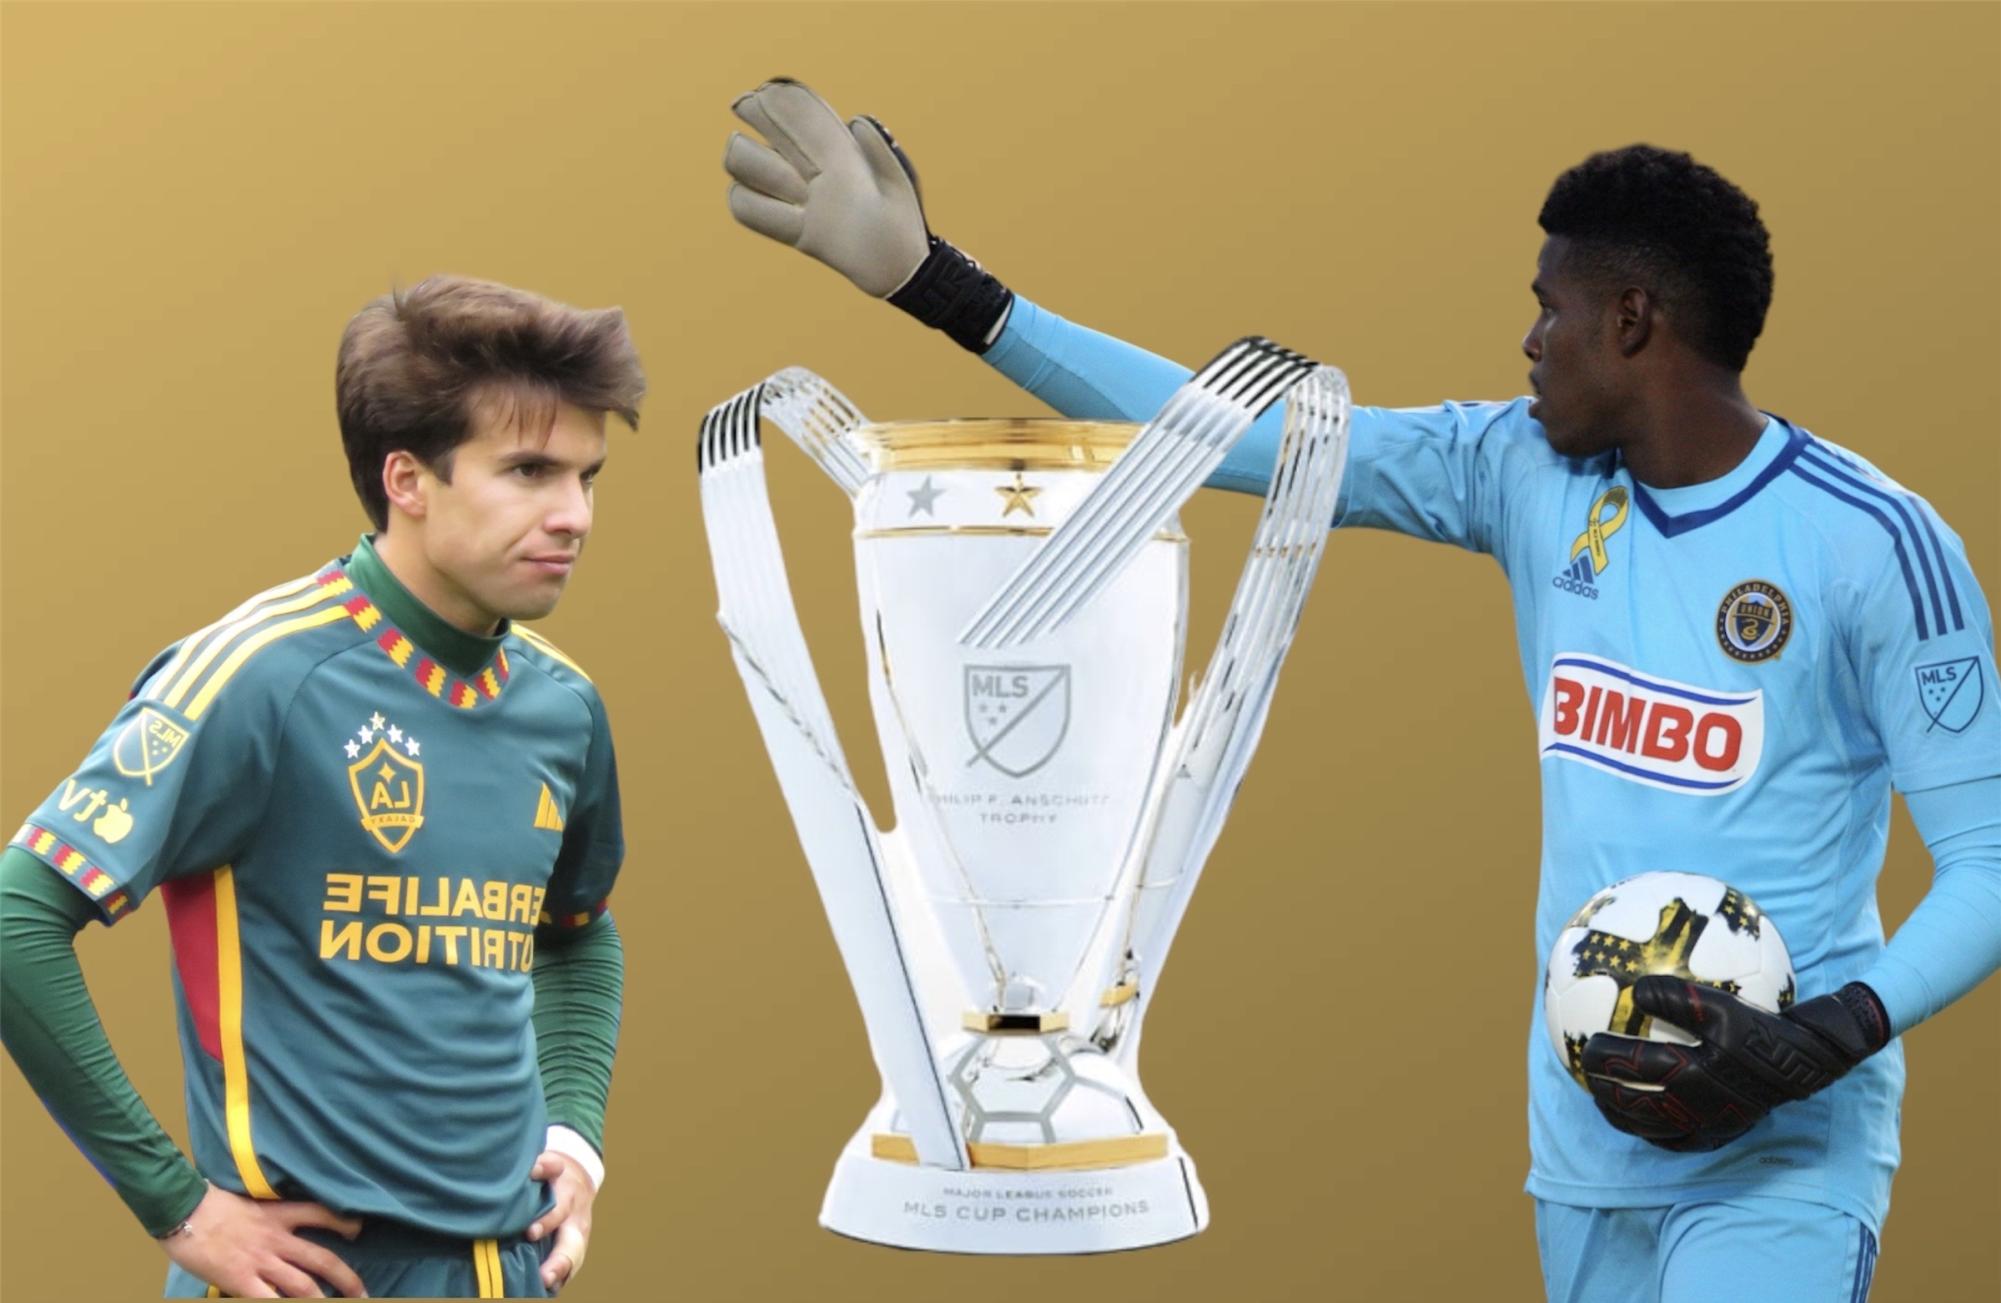 Two teams that potentially could make the 2024 MLS Cup Final, the Philadelphia Union and LA Galaxy. Riqui Puig (left) of the Galaxy is one of the leagues top young talents and the Unions Andre Blake (right) is the best goalkeeper in the MLS history.